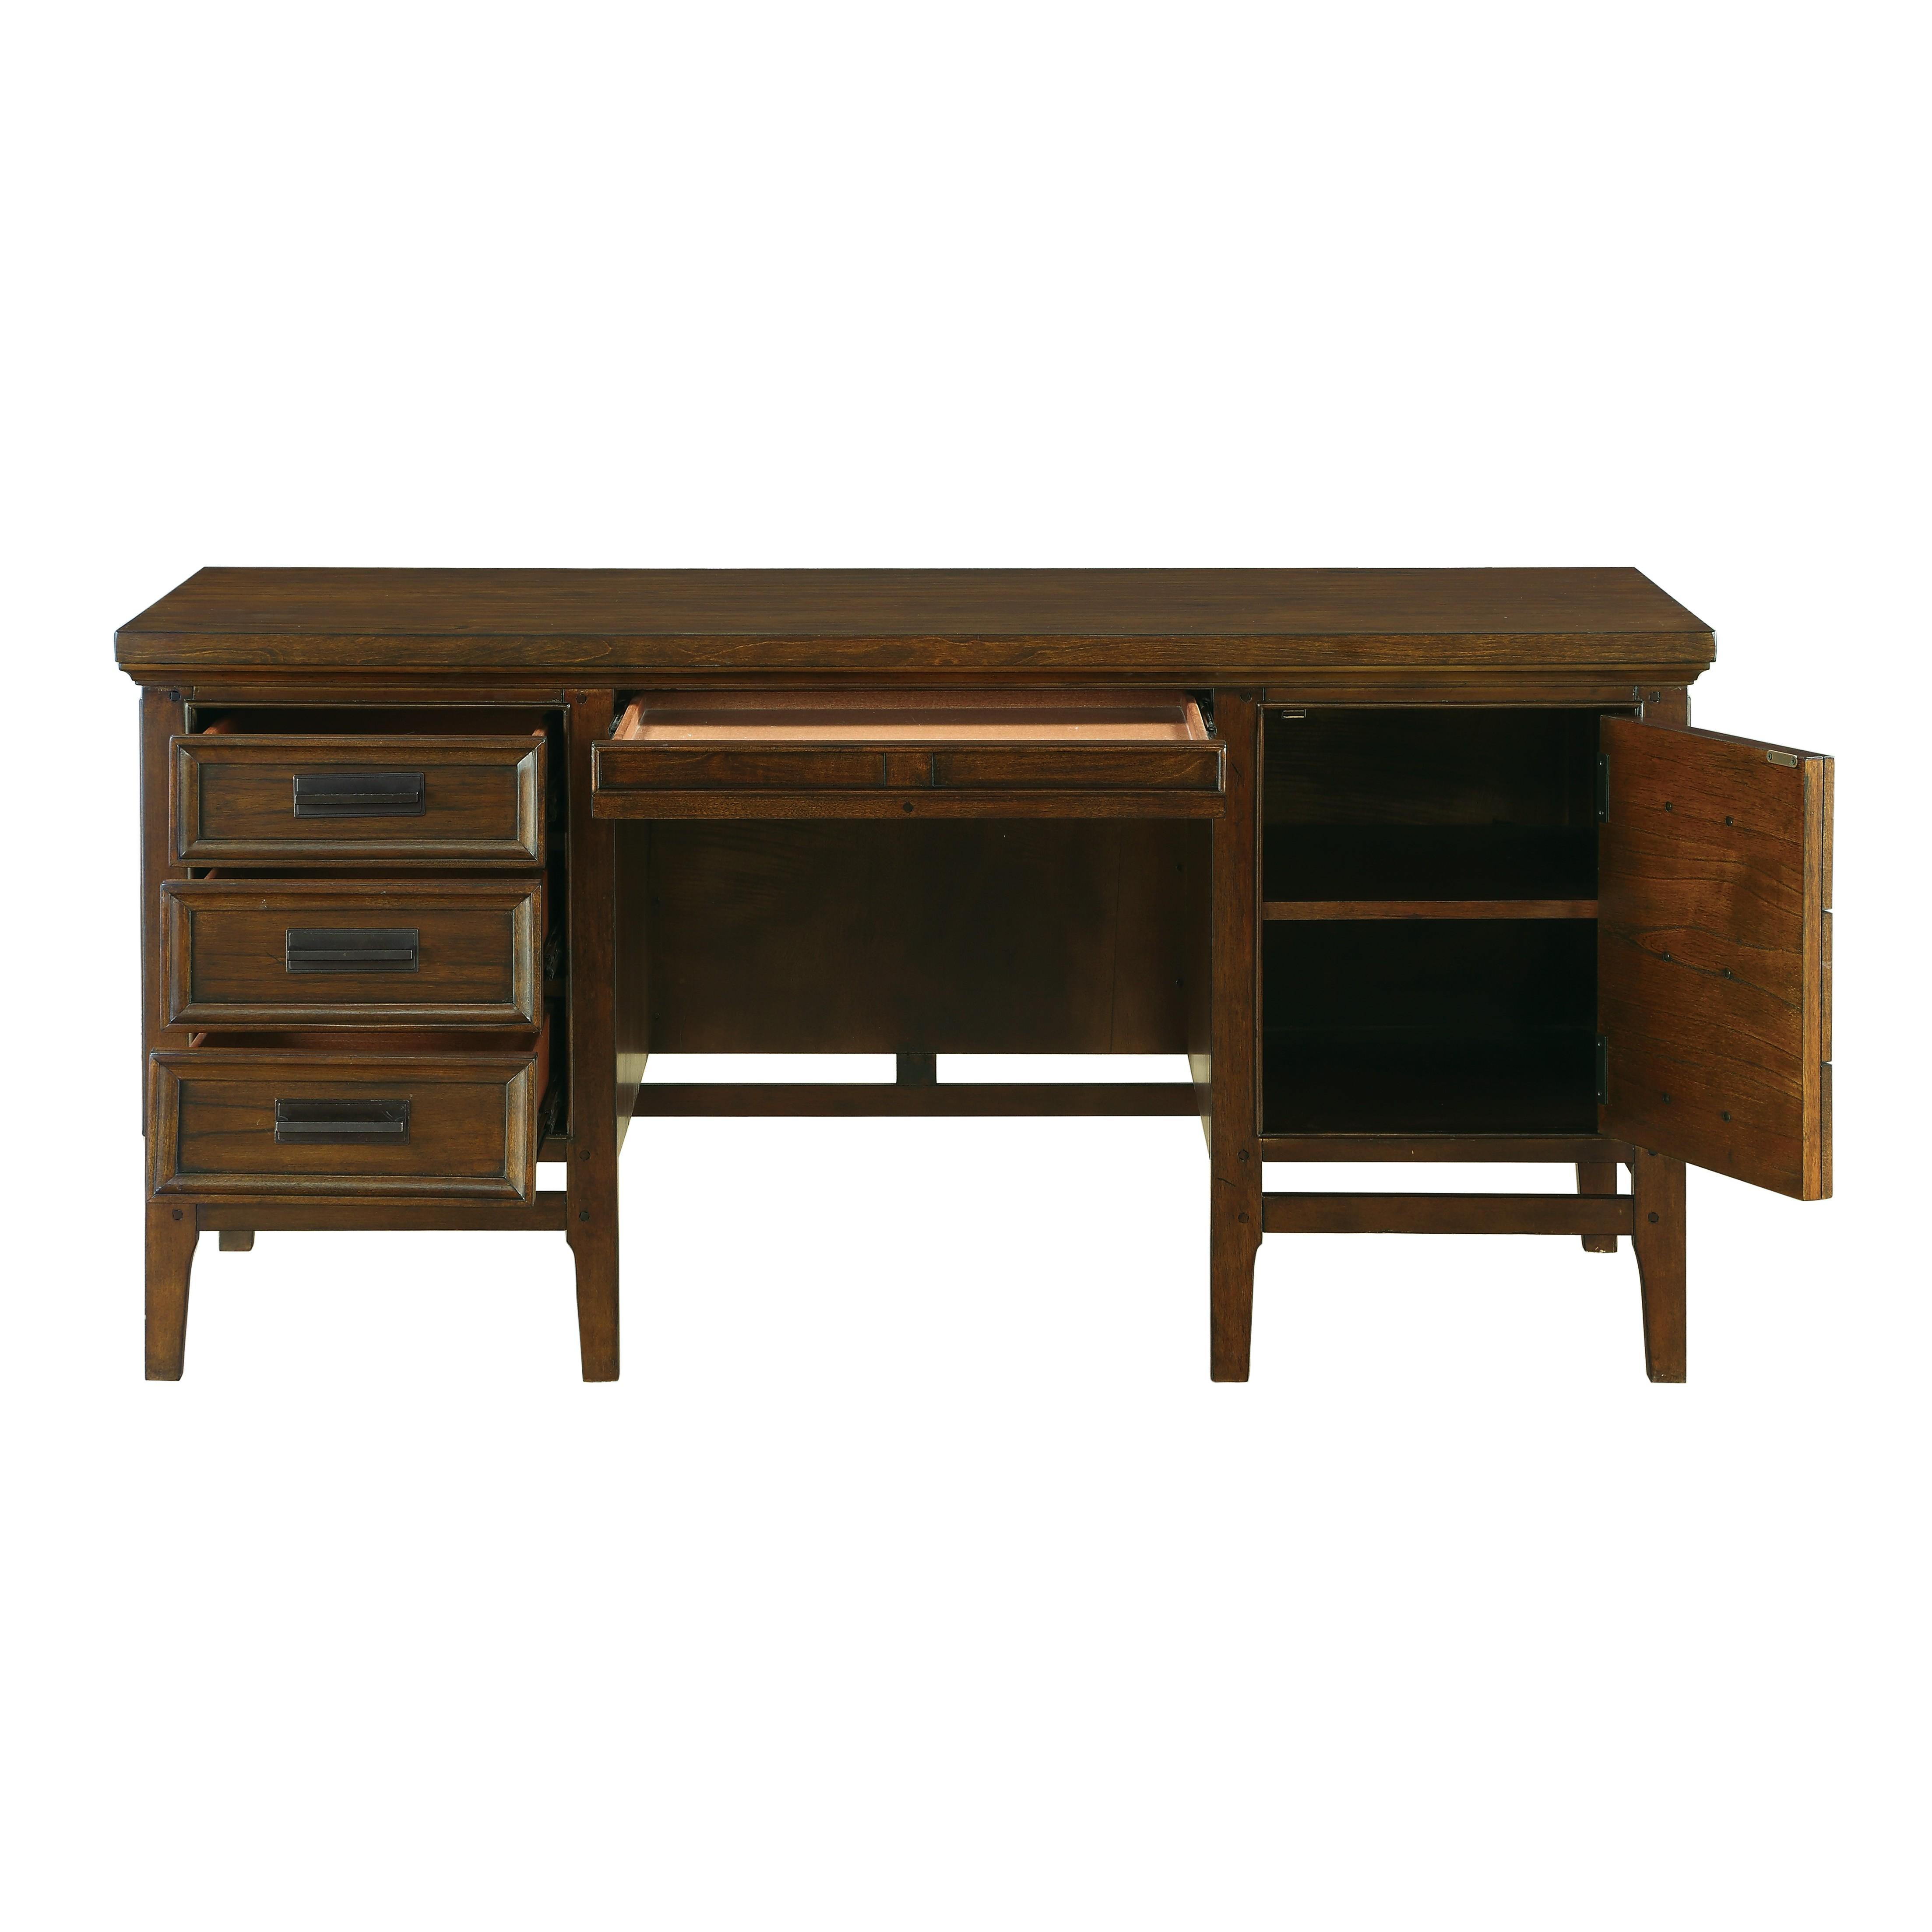 

    
Traditional Brown Cherry Wood Executive Desk Homelegance 1649-17 Frazier Park
